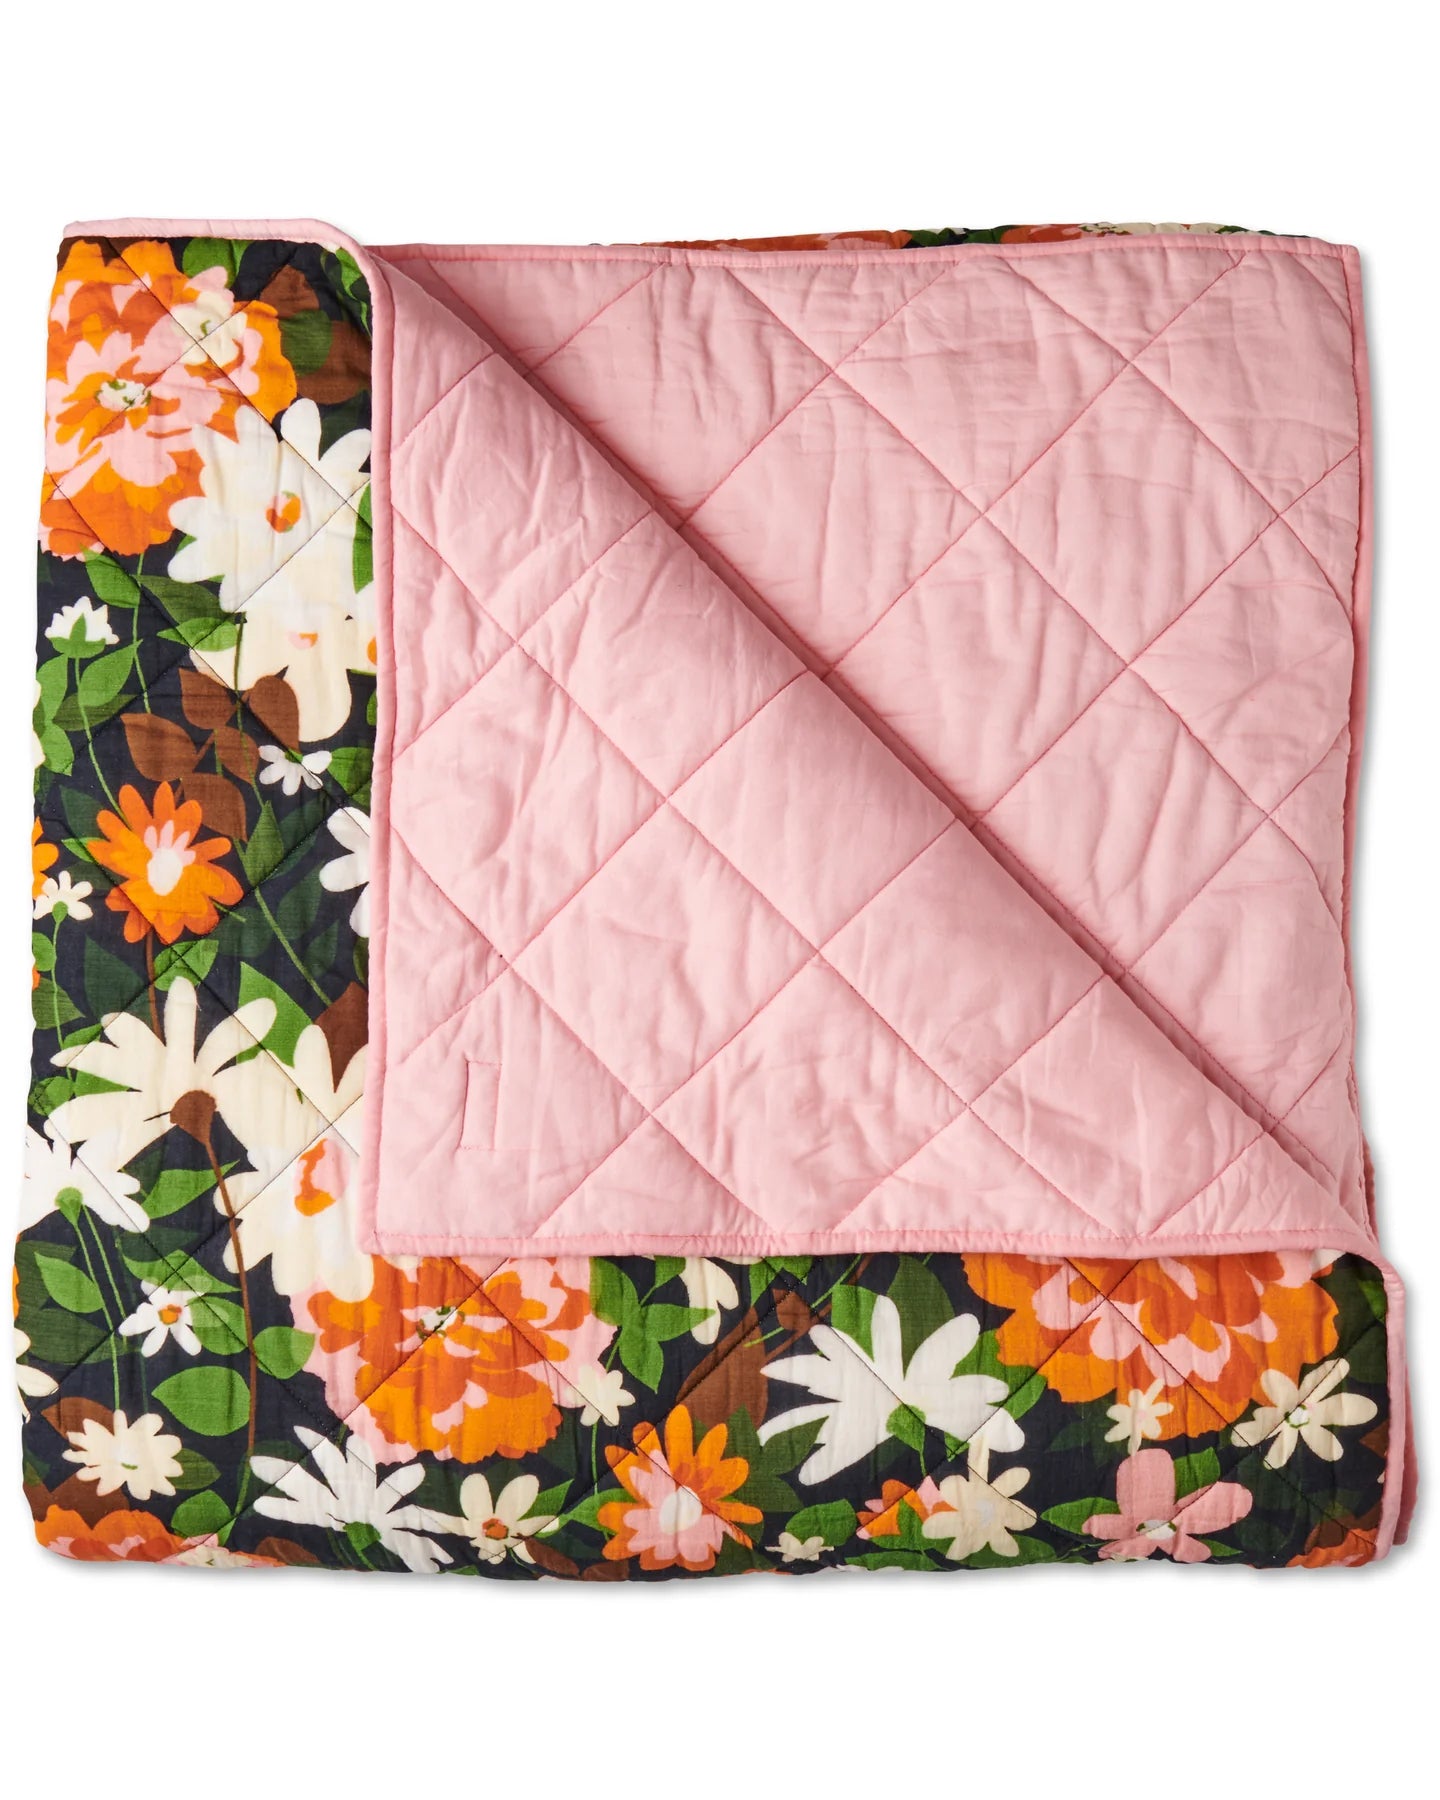 Kip & Co Dreamy Floral Organis Cotton Quilted Bedspread